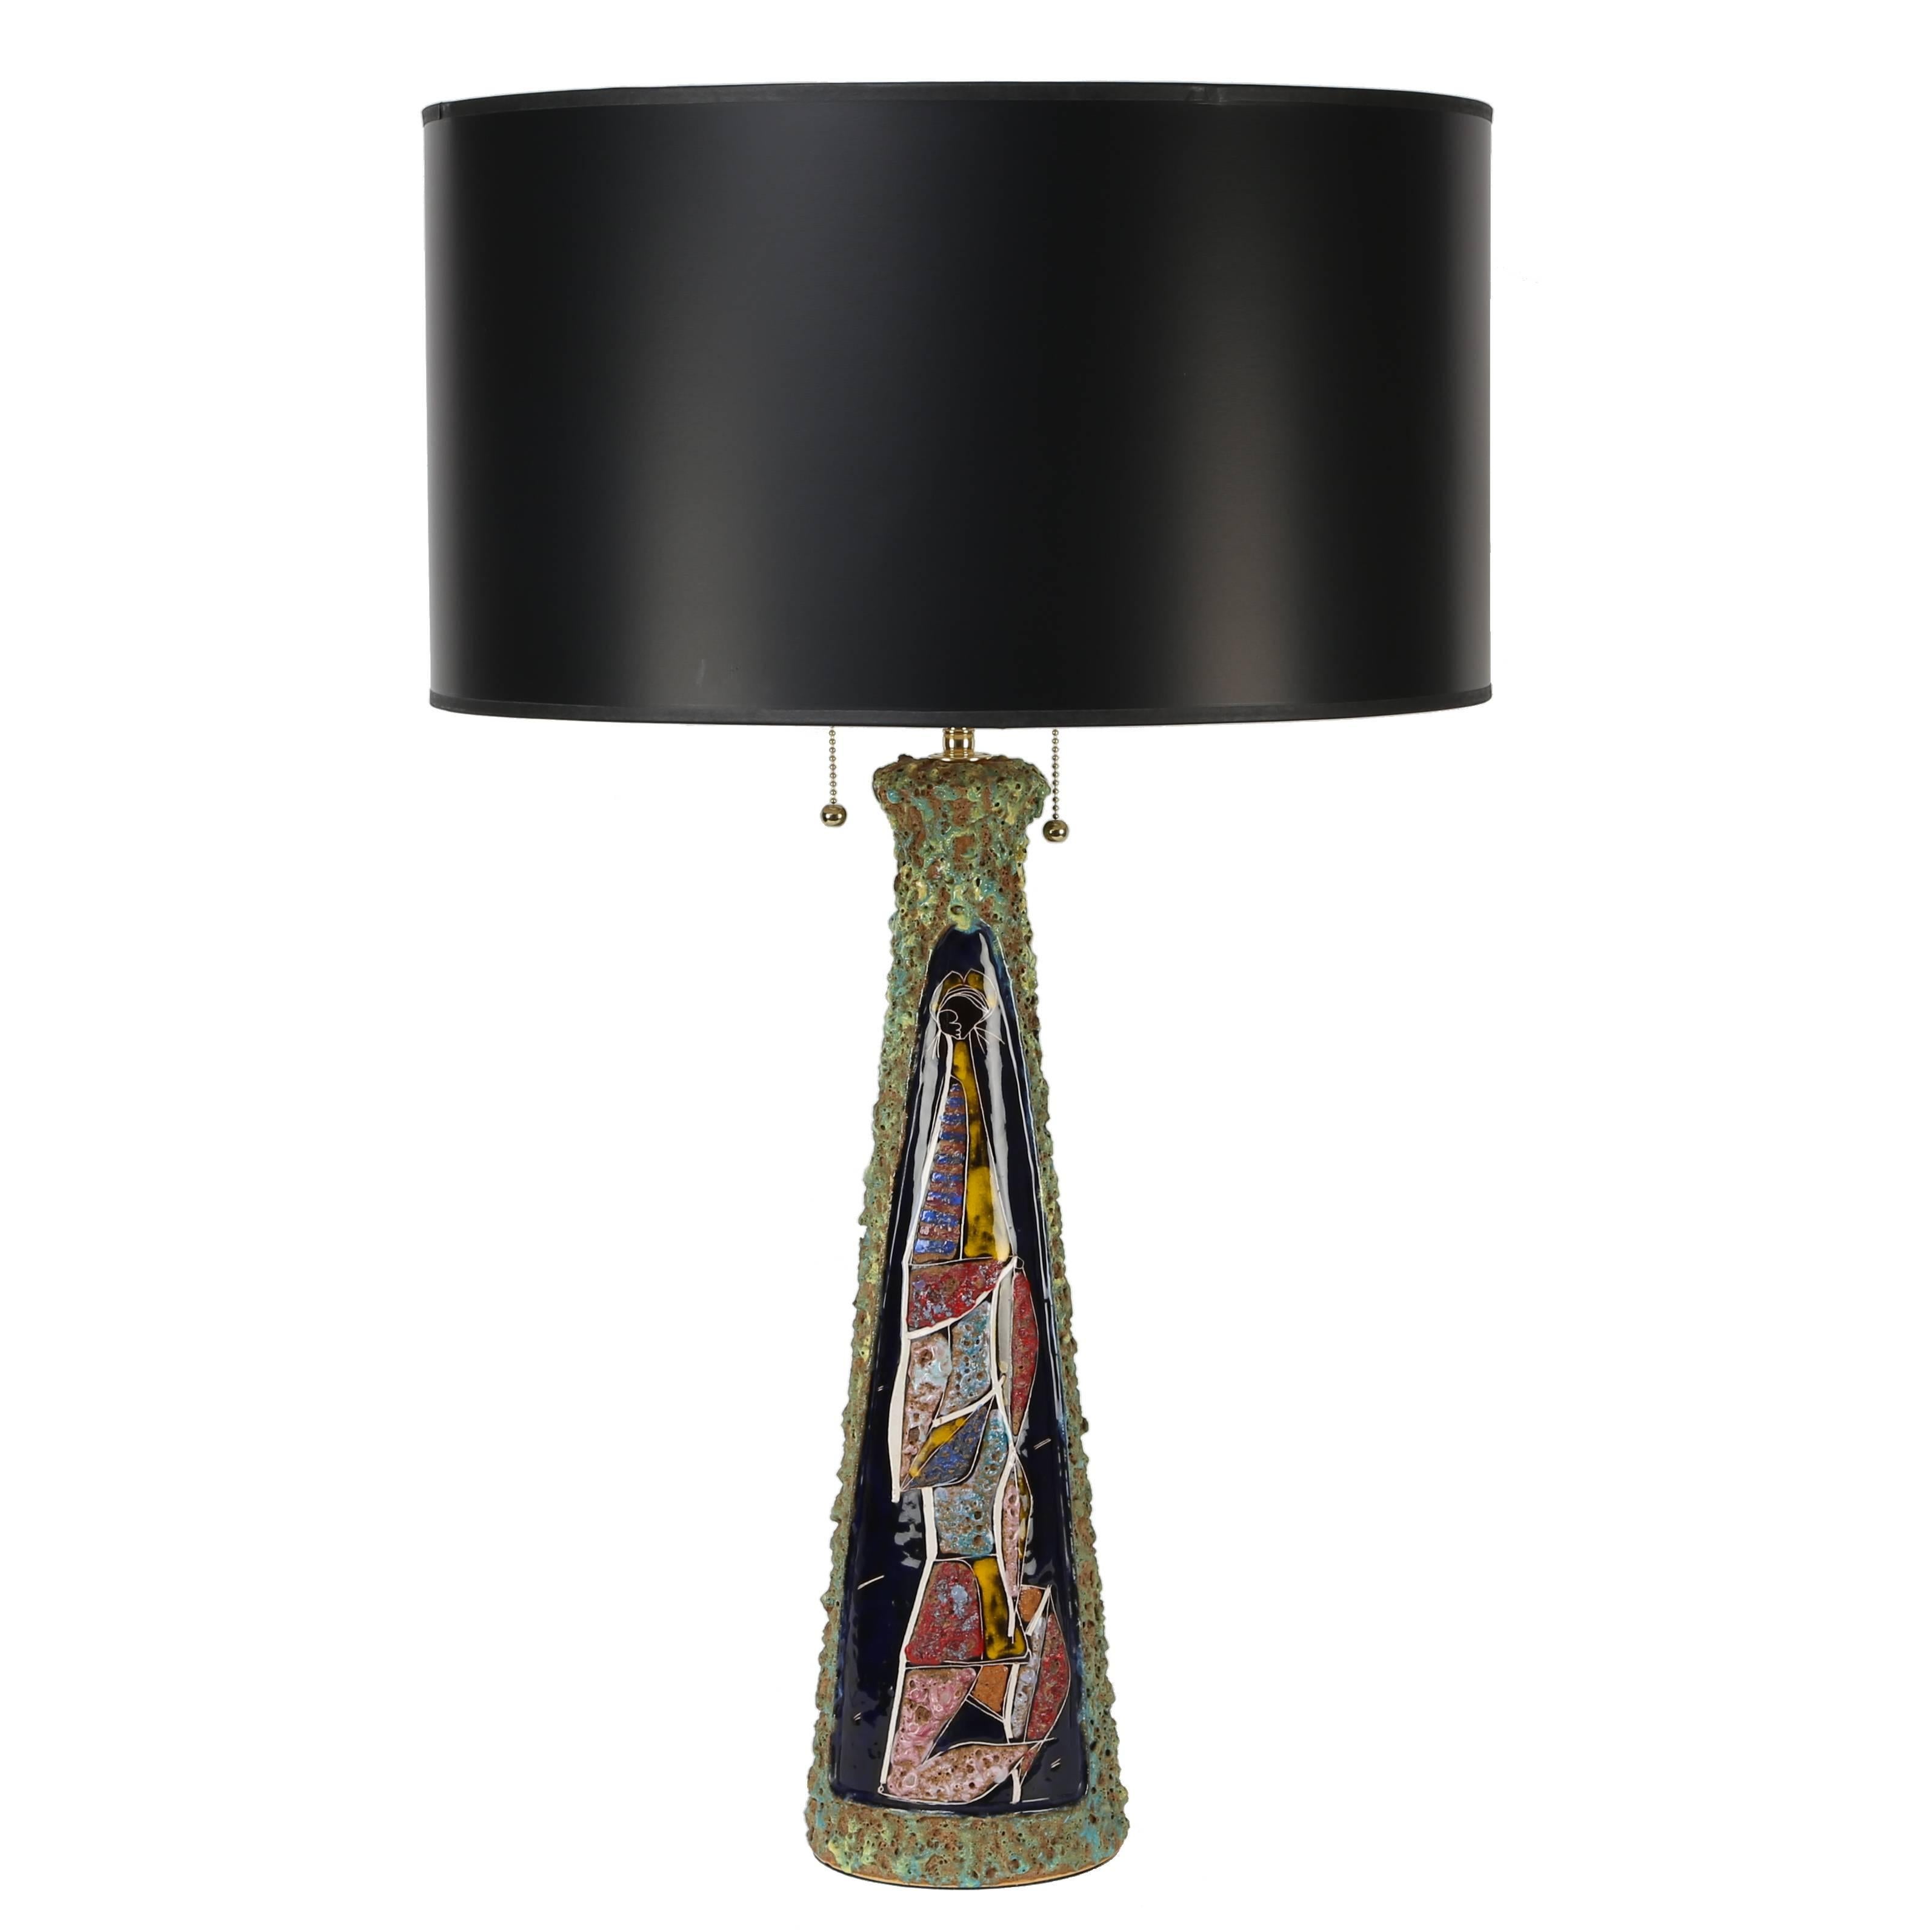 Modern Italian 1960s Multi-Colored Ceramic Table Lamp With Incised Figure